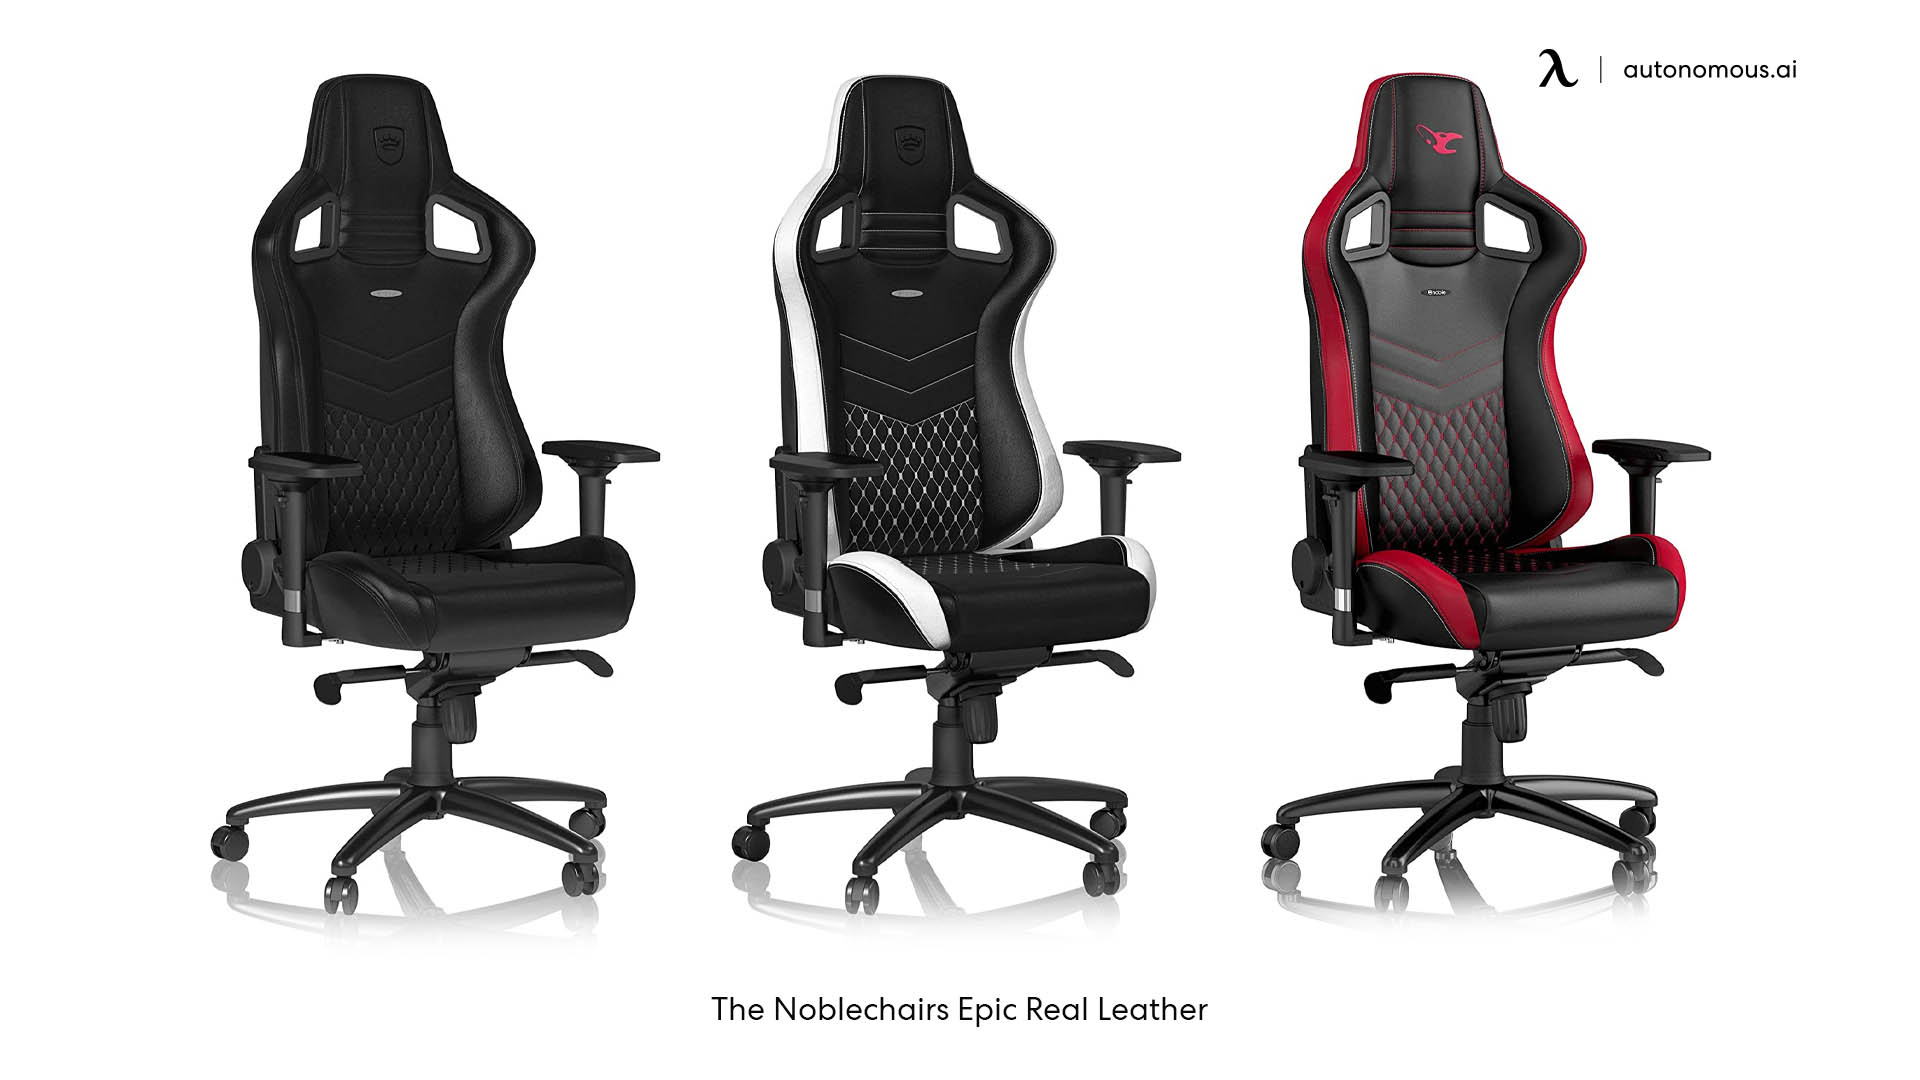 The Noble-chairs Epic Real Leather